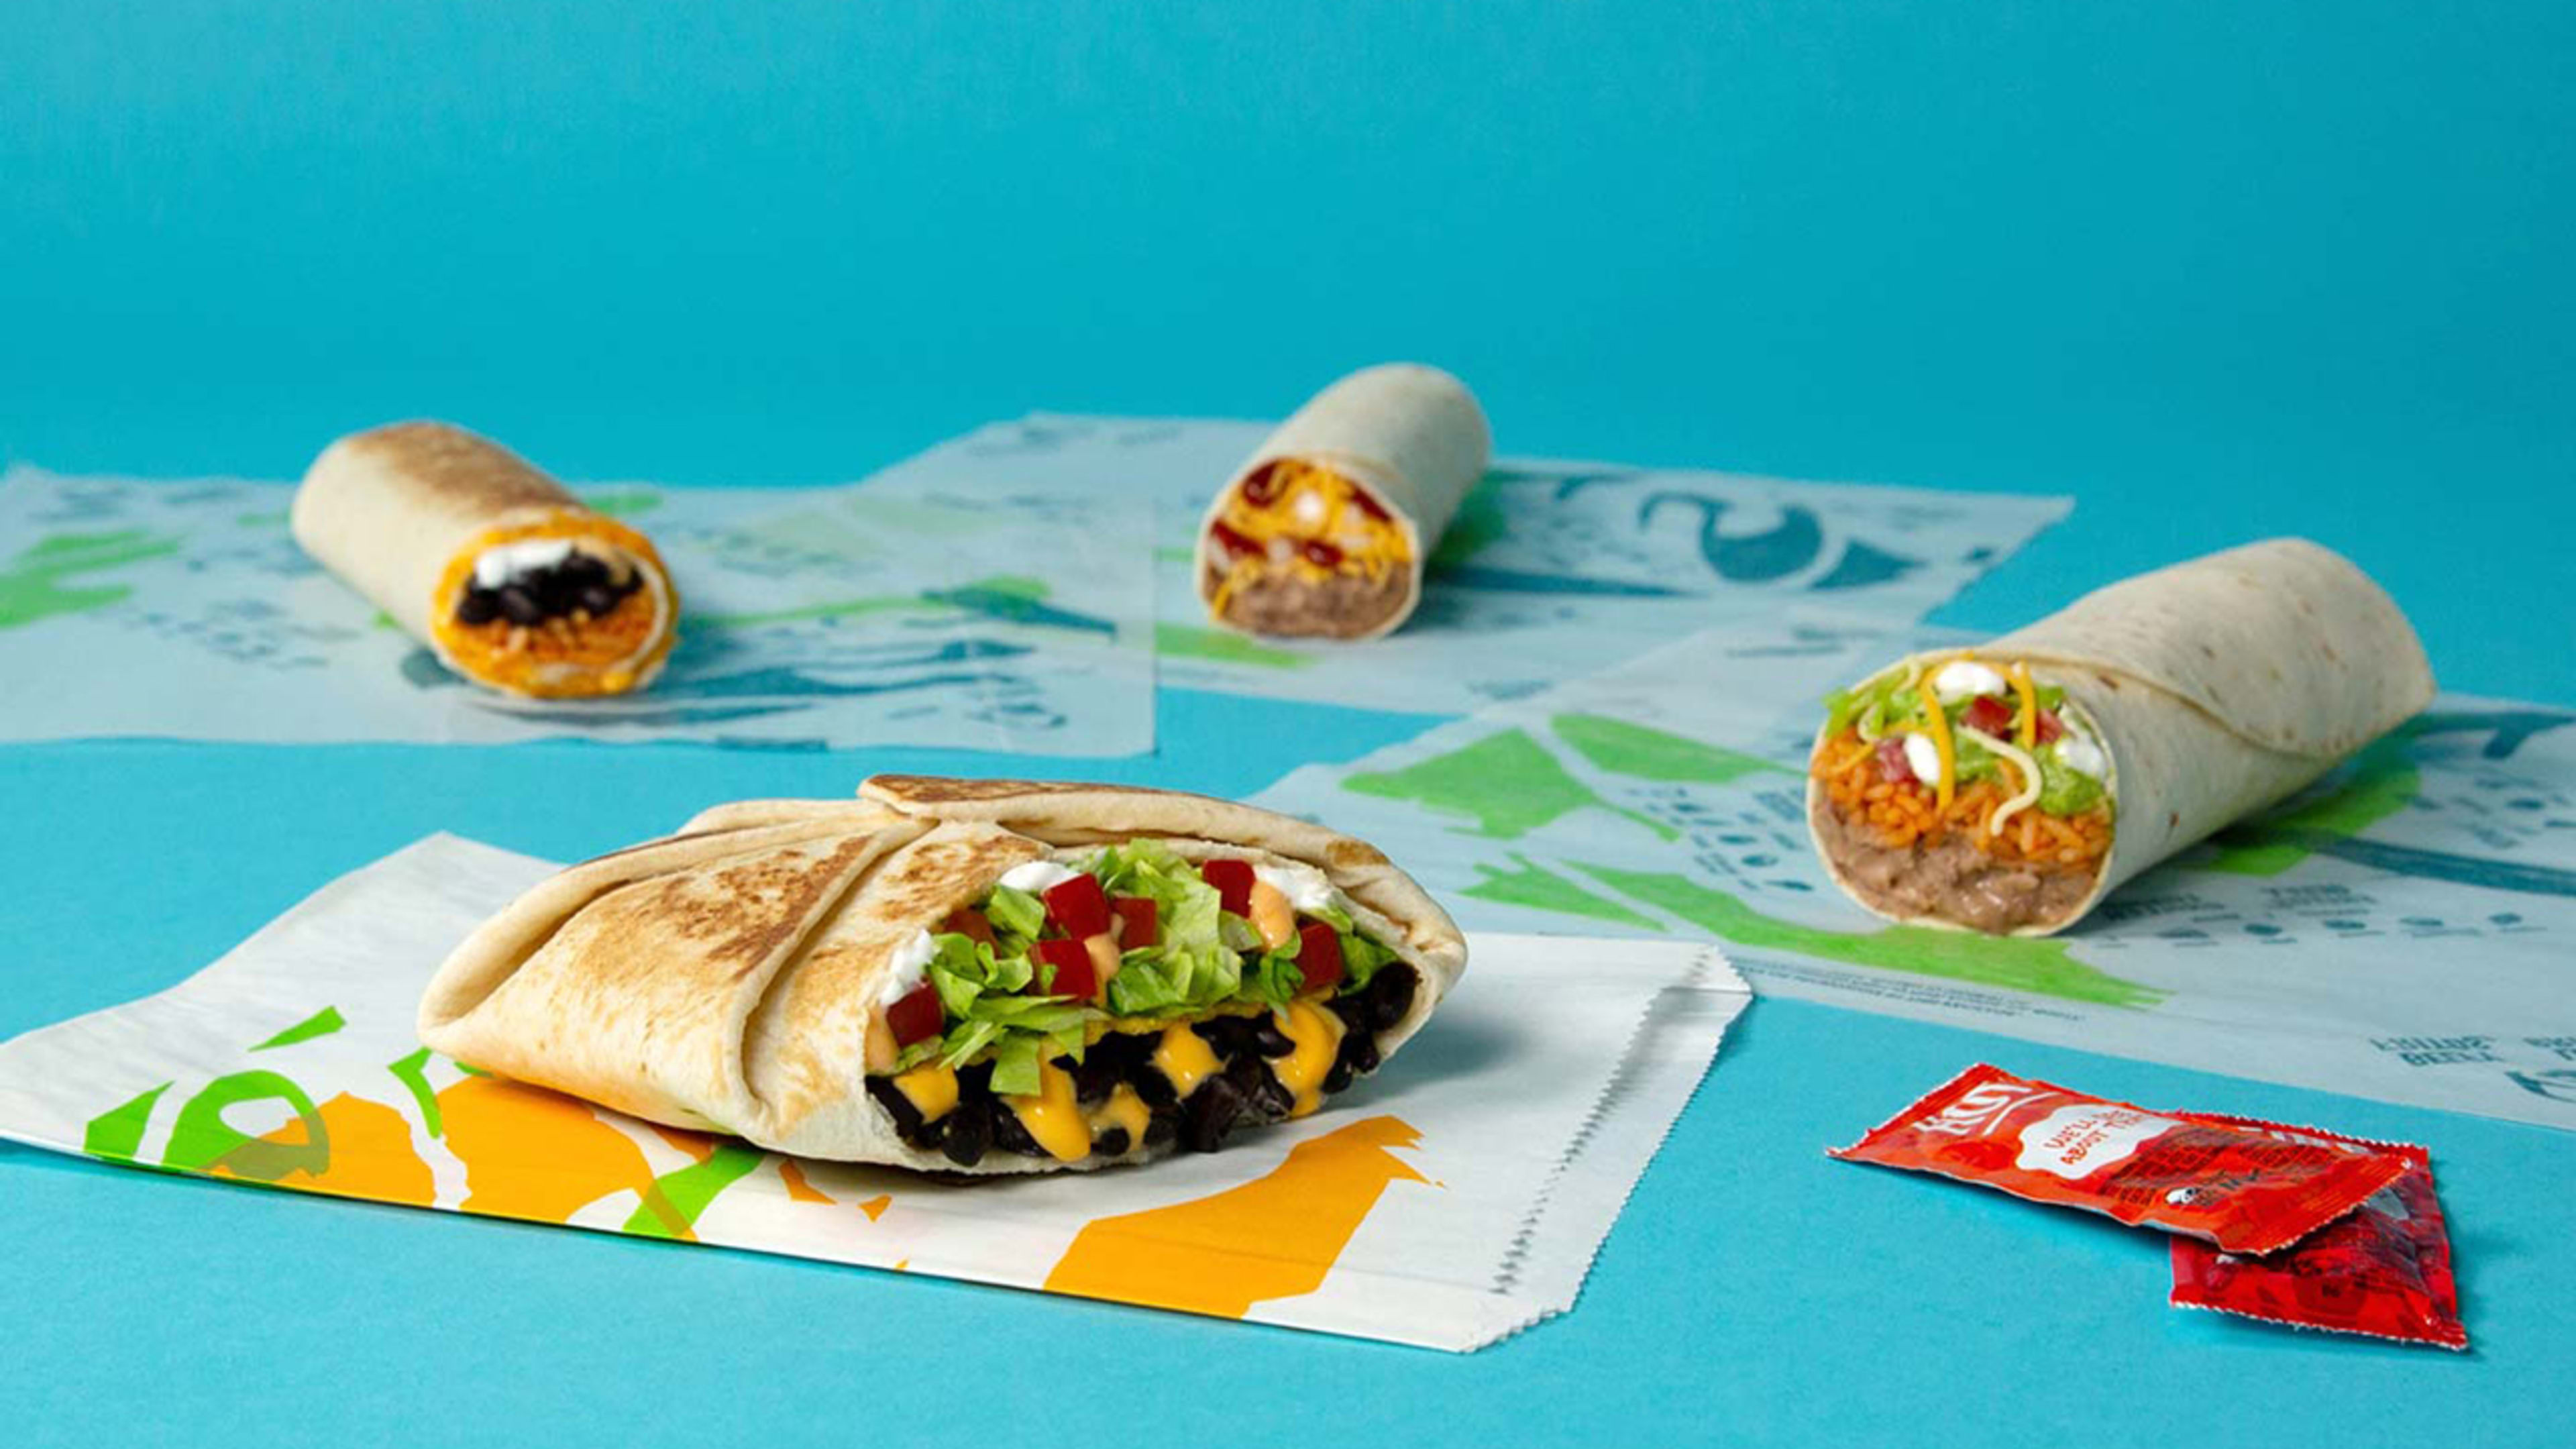 Taco Bell’s new vegetarian menu is here to remind you that plants are plant-based too